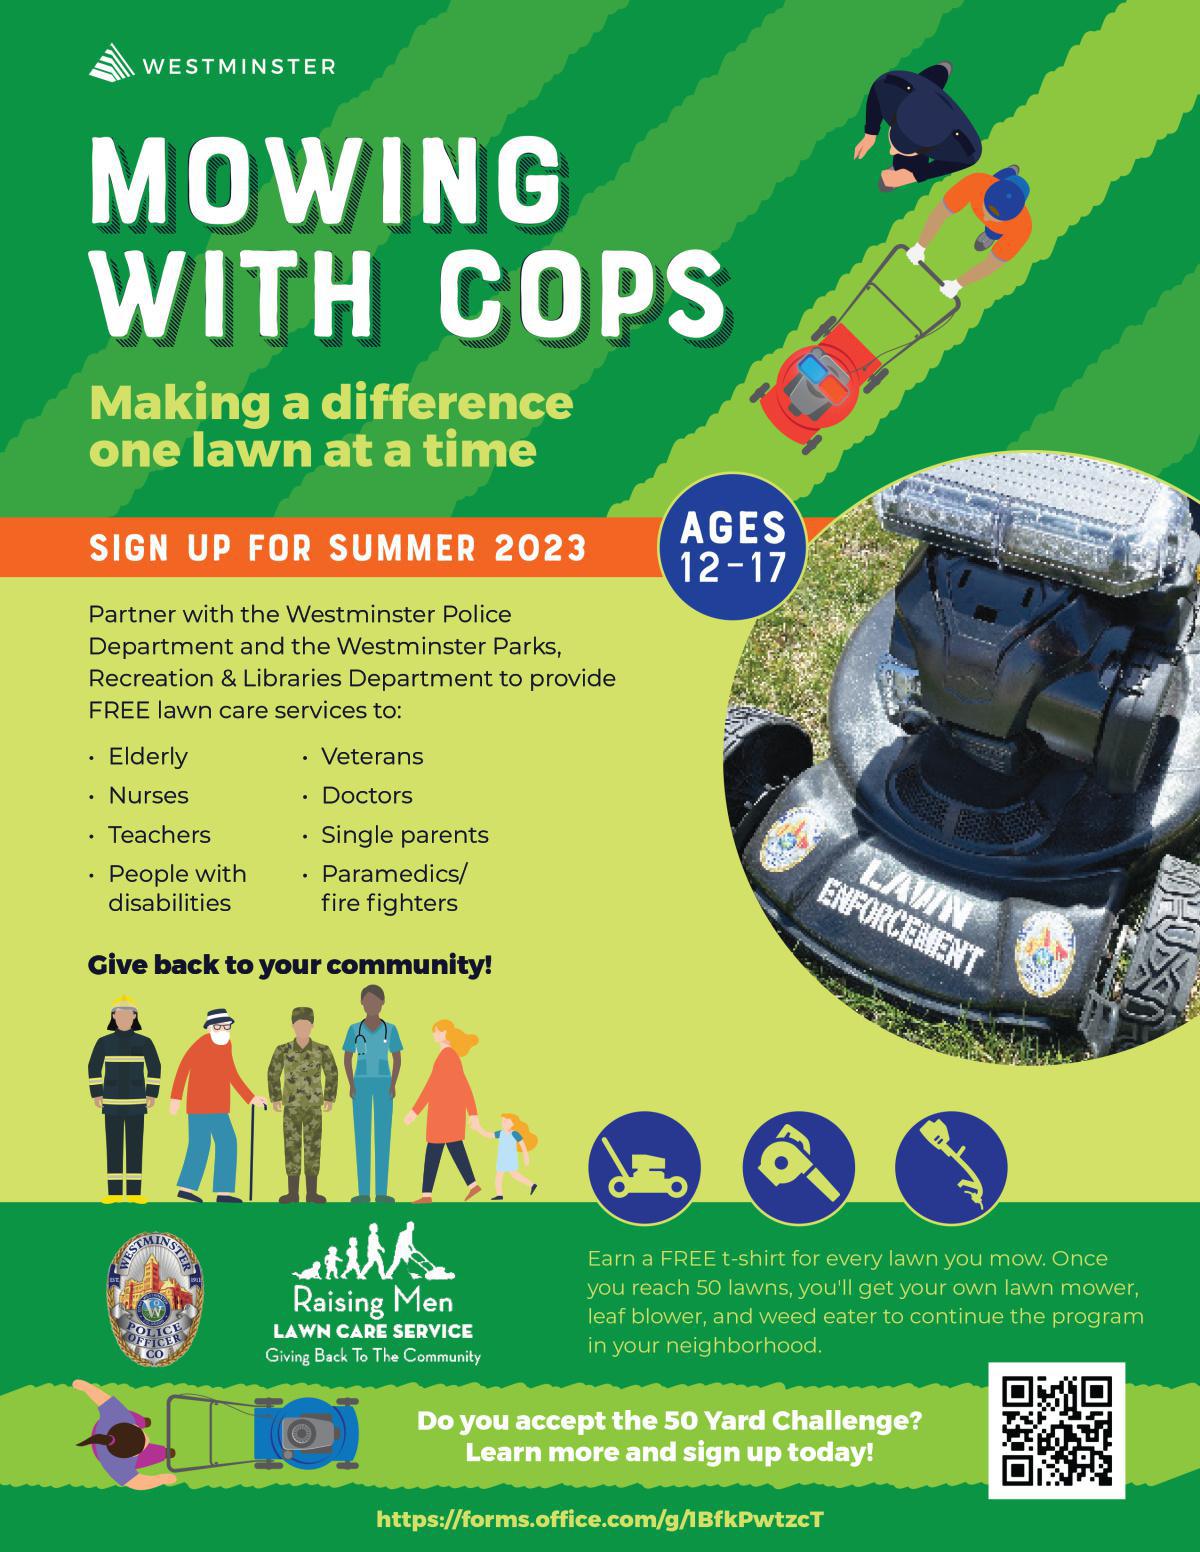 Mowing with Cops - Making a difference one lawn at a time